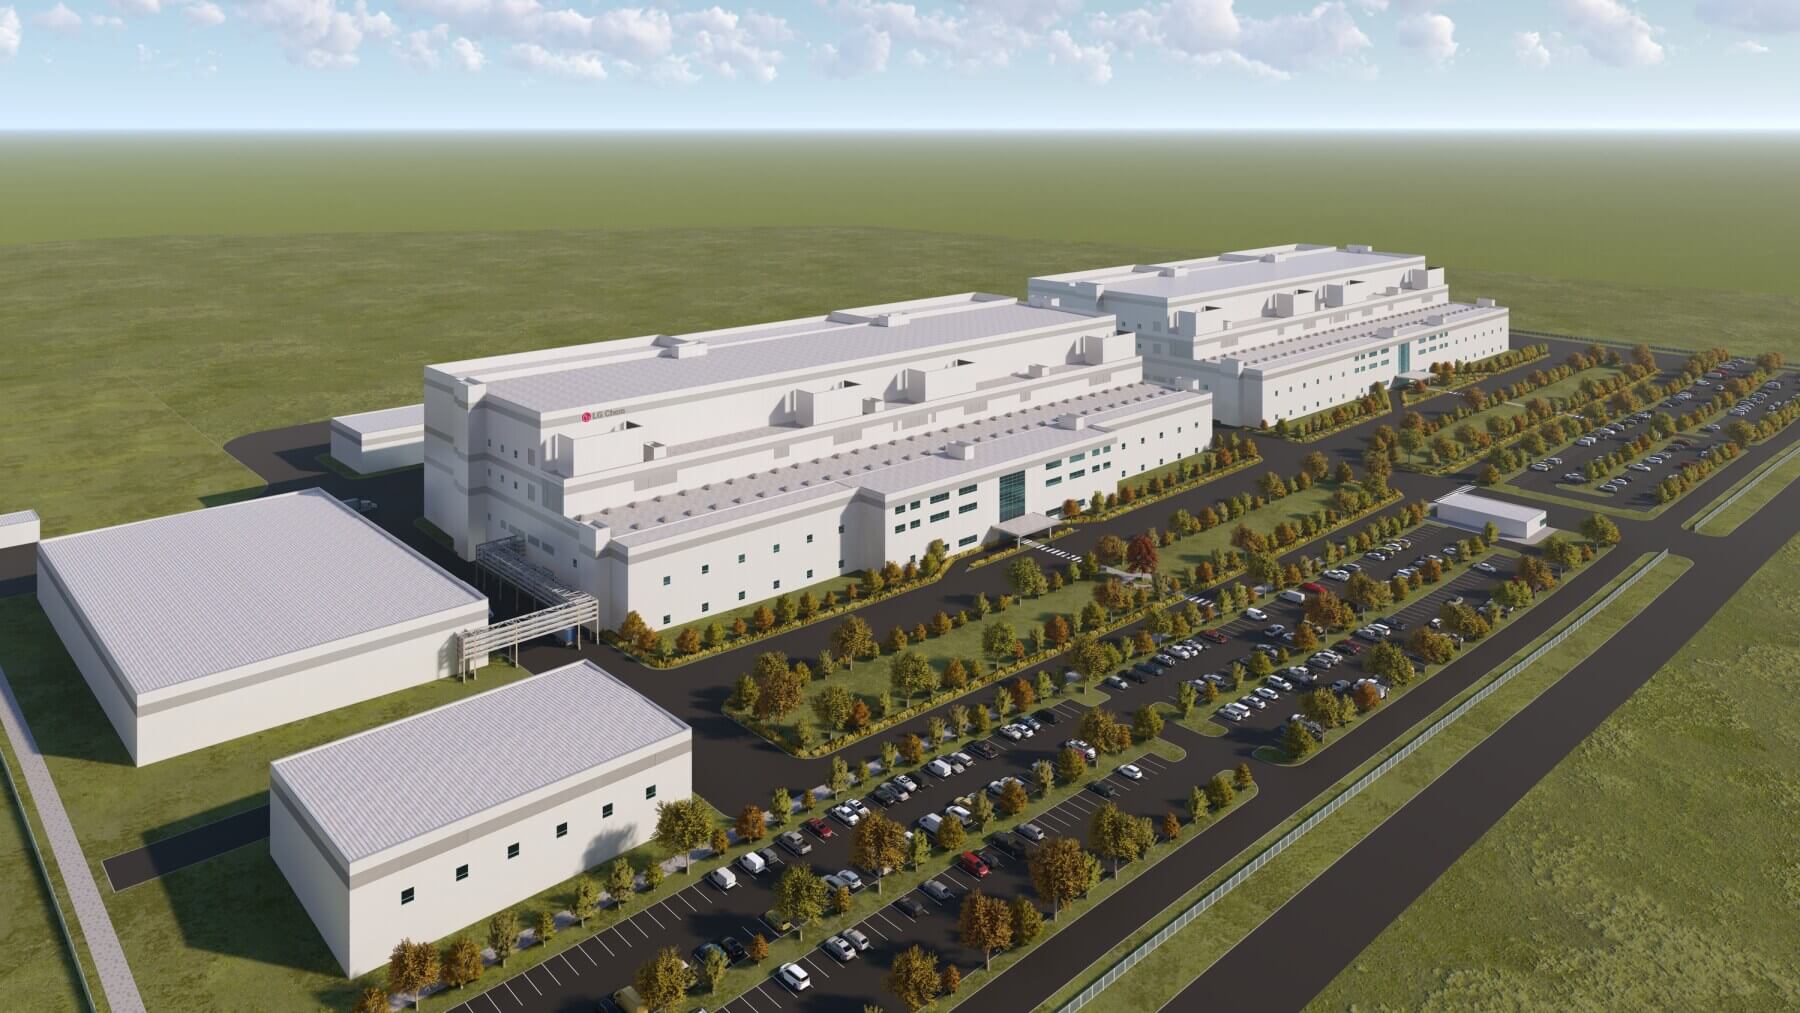 a rendering of the LG Chem battery cathode manufacturing plant